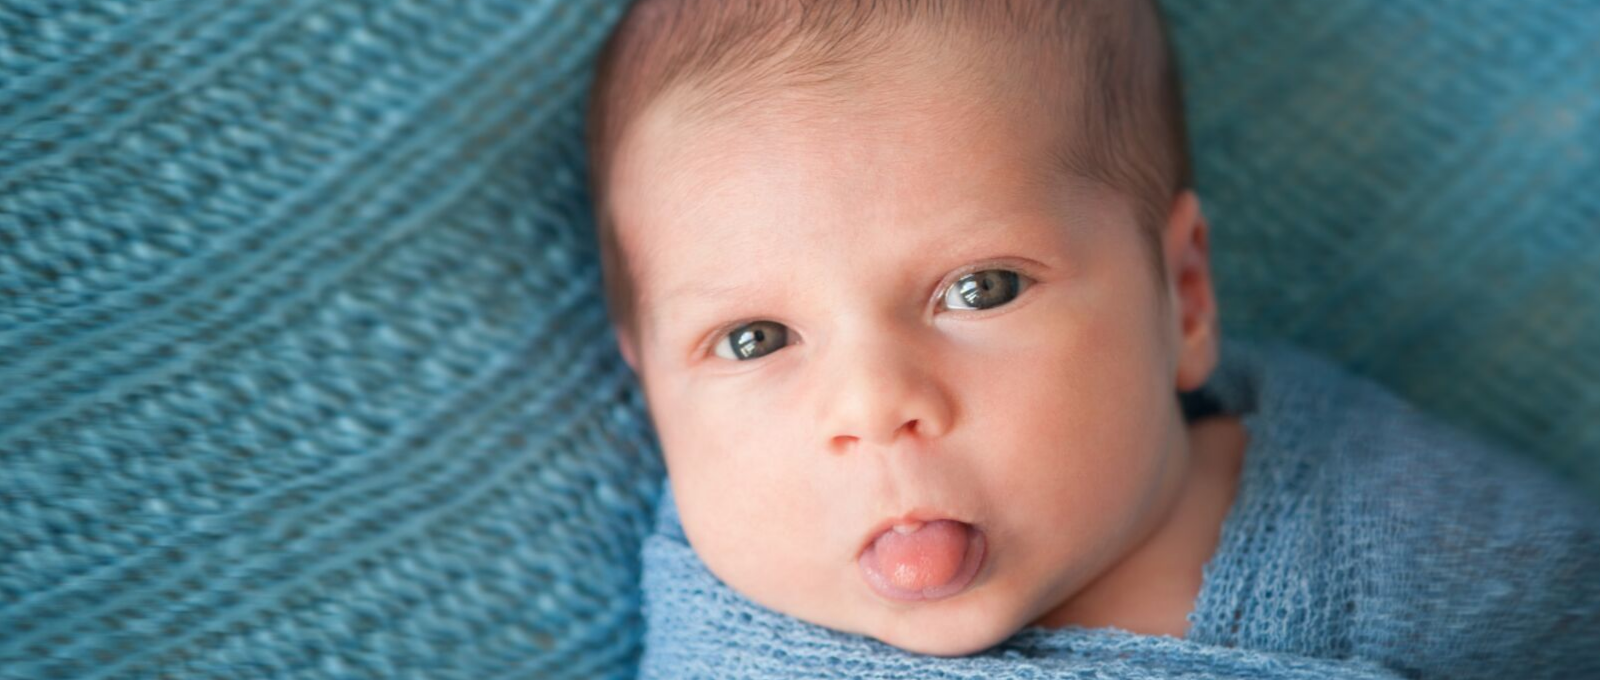 Baby sticking tongue out in response to the same from a grown up, example of mirror neurons